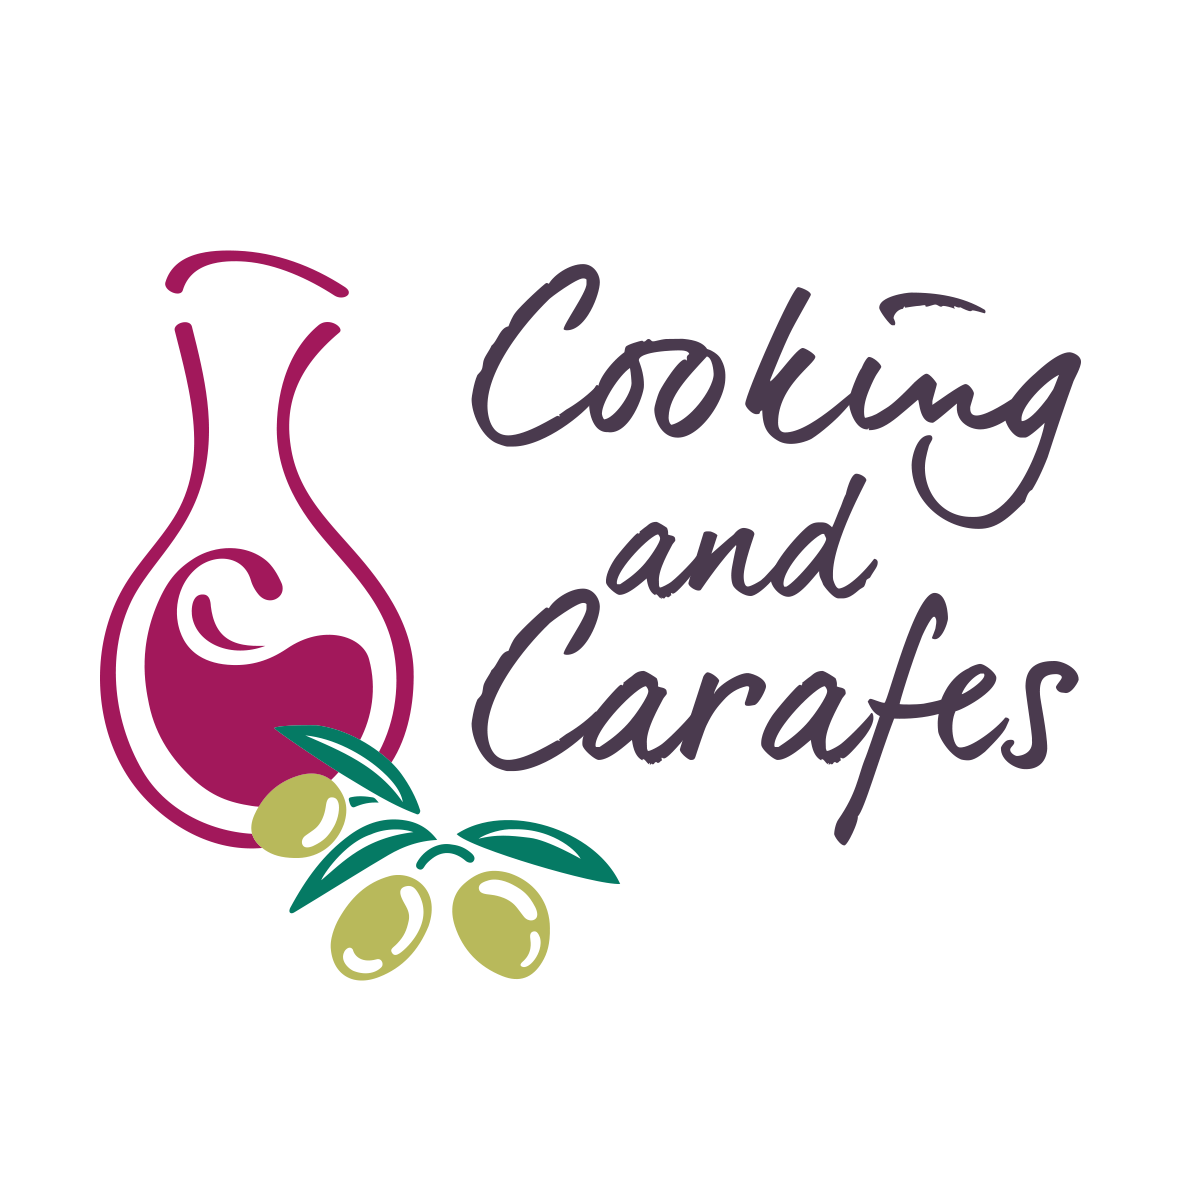 Cooking & Carafes